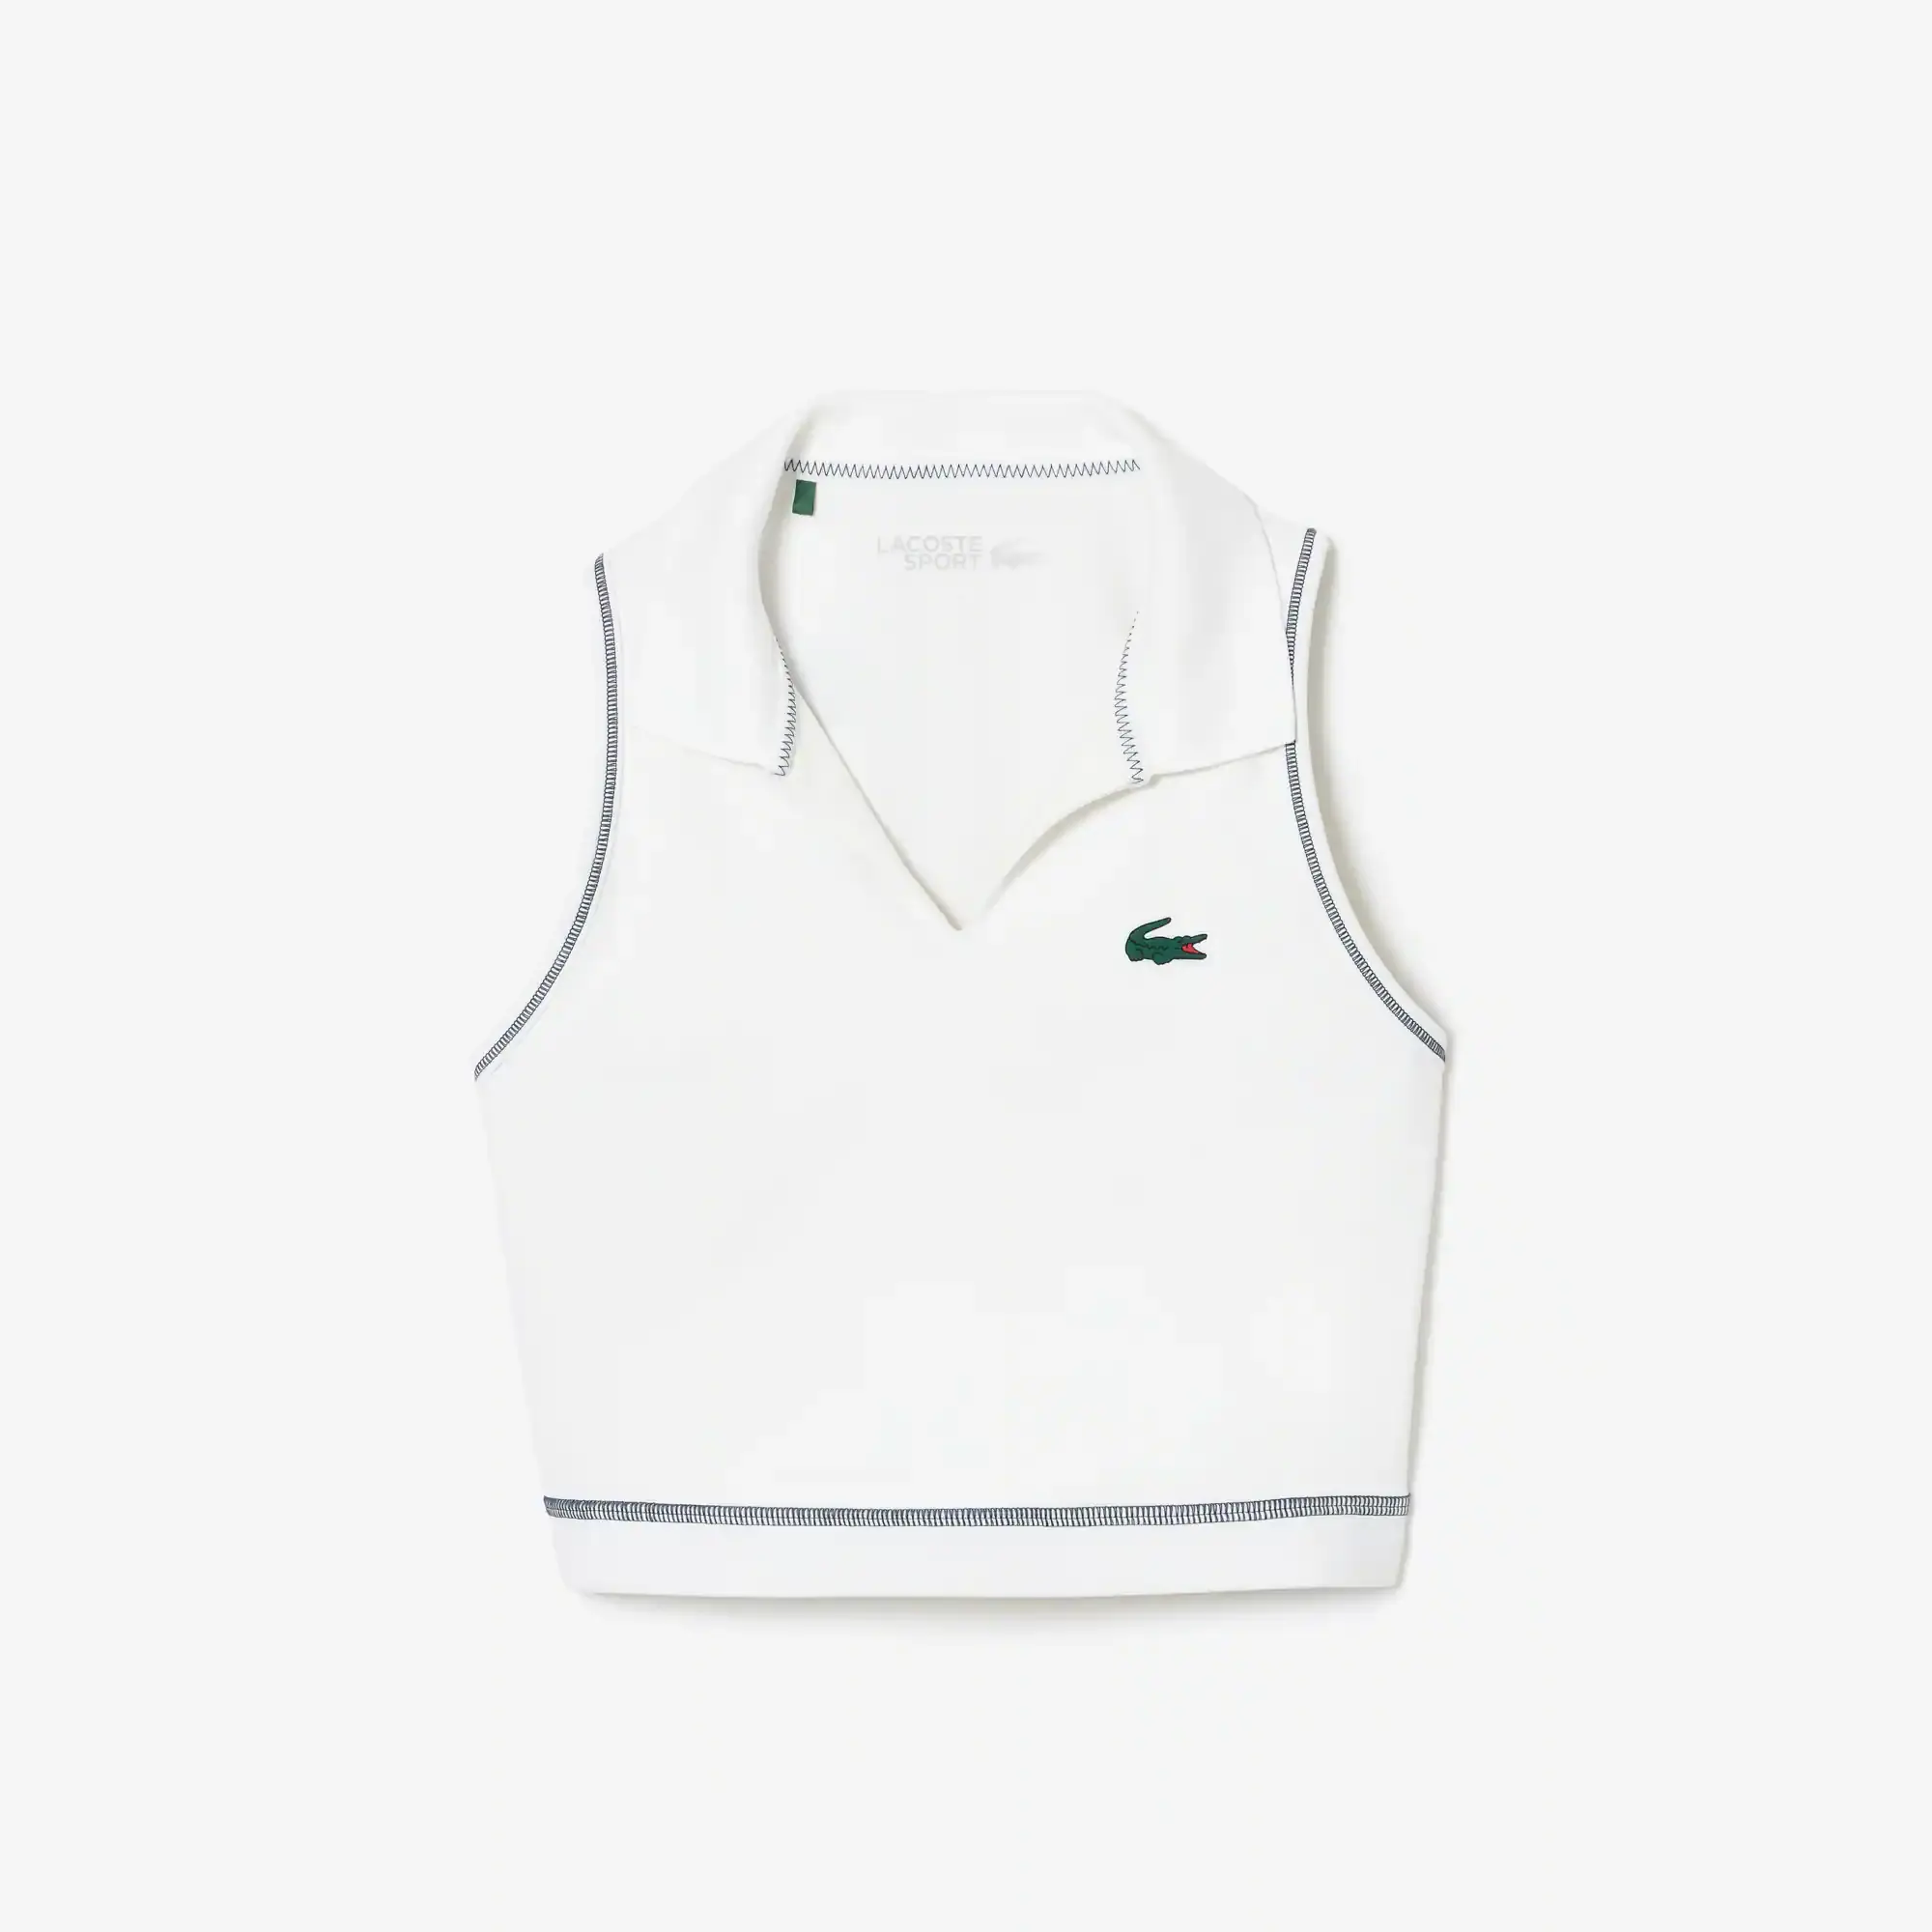 Lacoste Women's Polo Style Recycled Fiber Sports Bra. 2